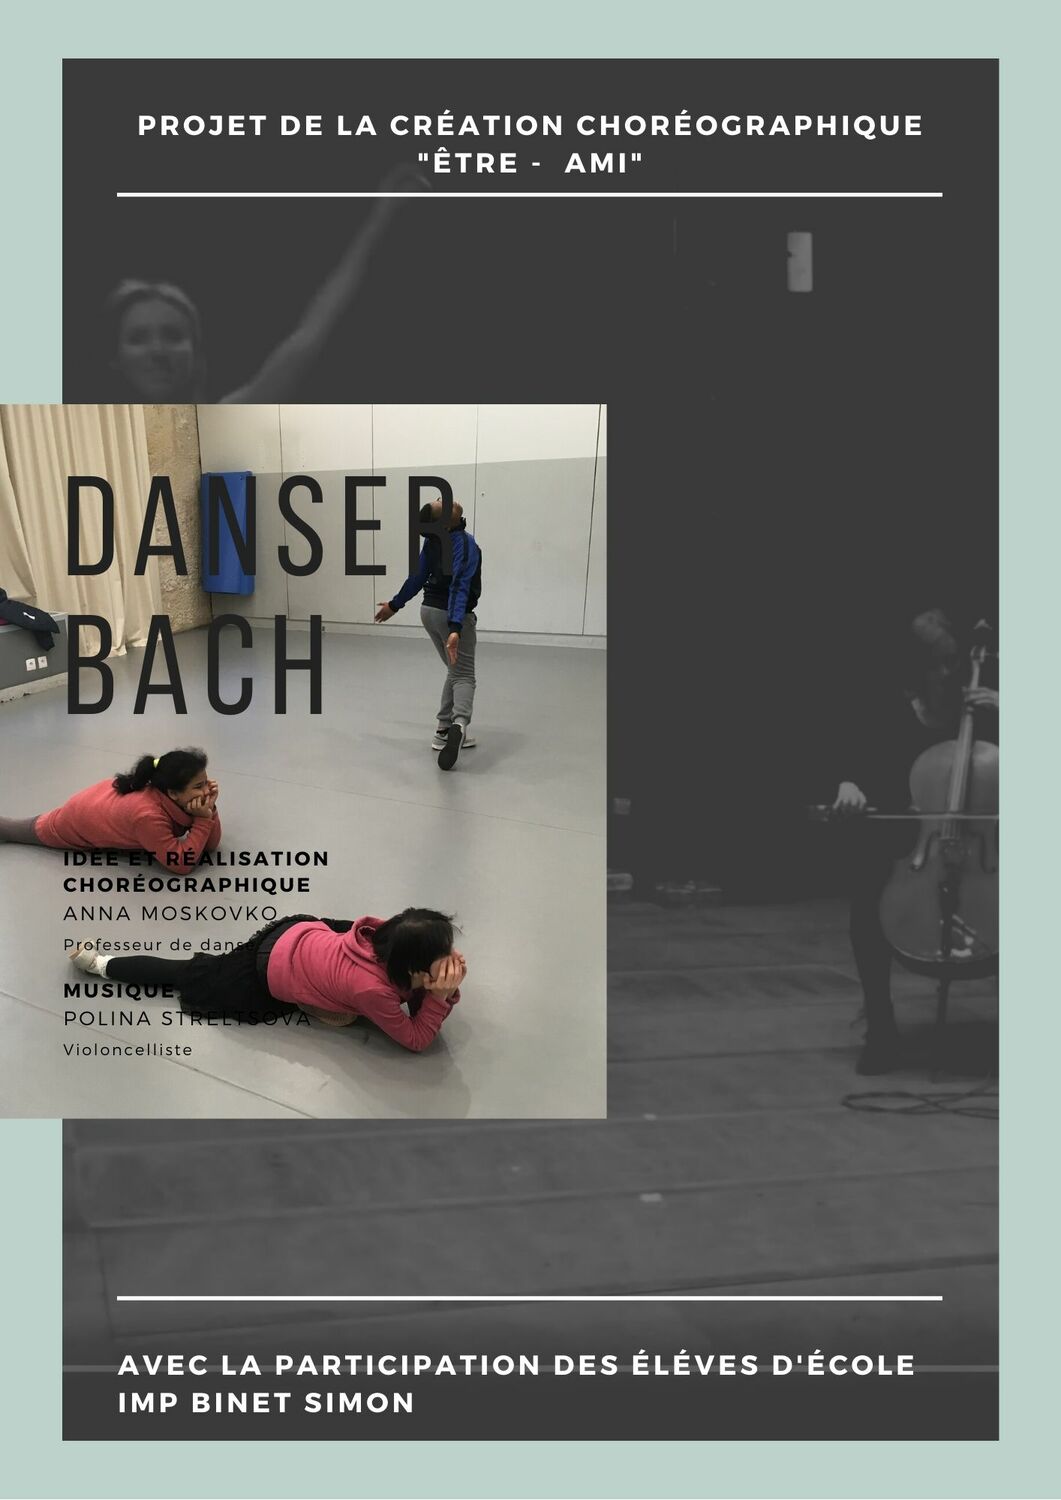 <span style="font-weight: bold;">Dance improvisatin progress on music of Bach on cello with handicapate children.&nbsp;</span>